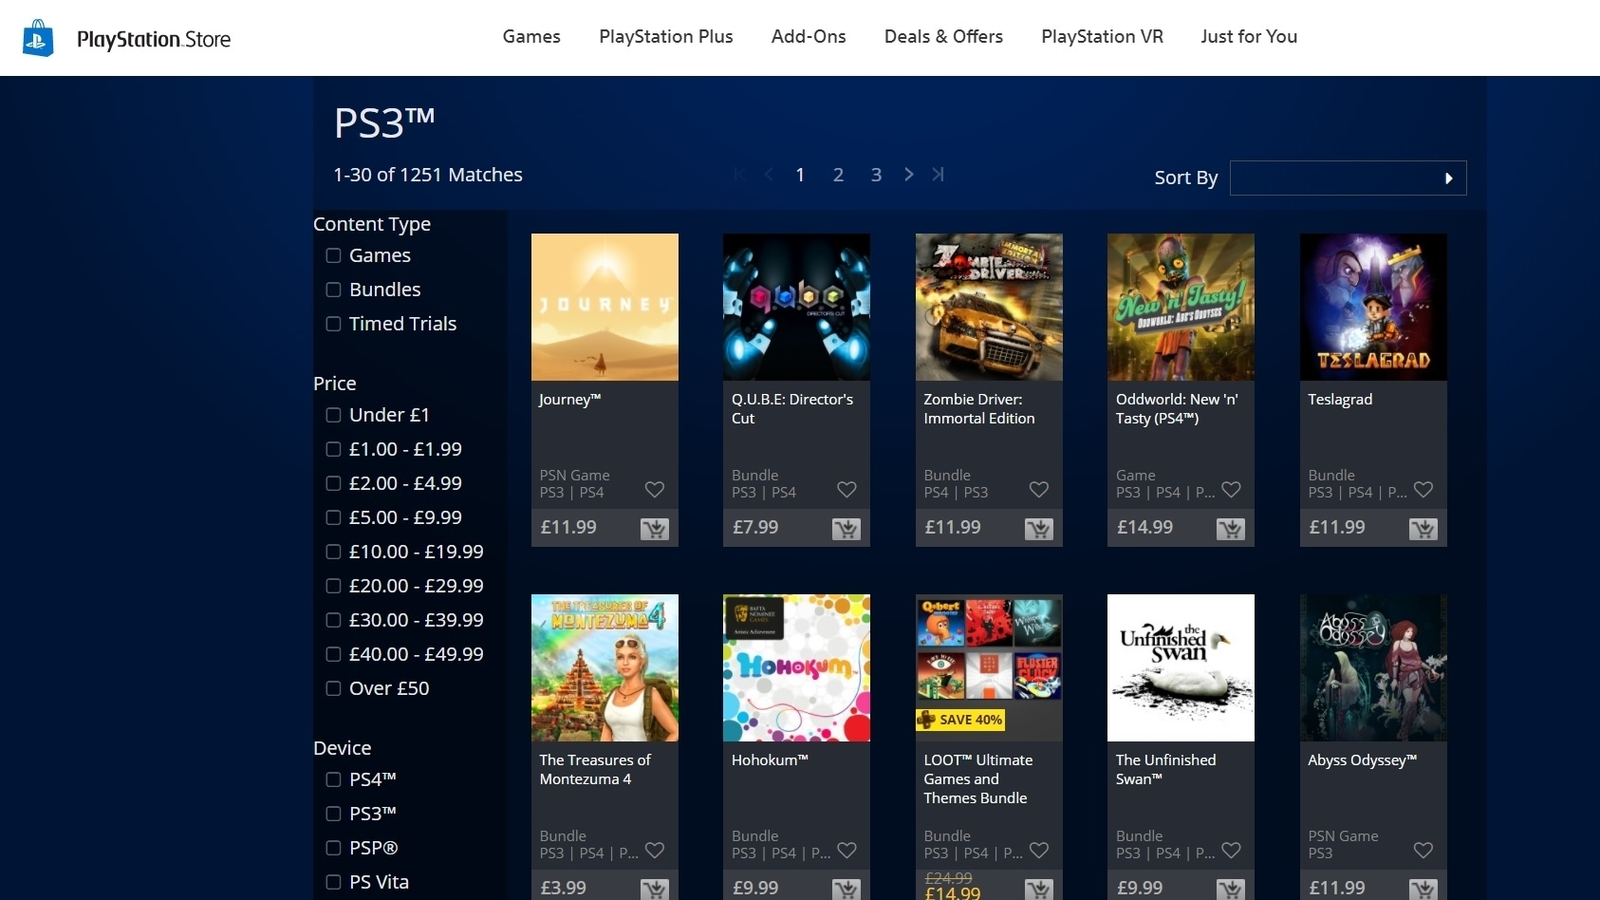 New Releases in PlayStation Store (Vita, PSP, PS5, PS3) — PS Deals